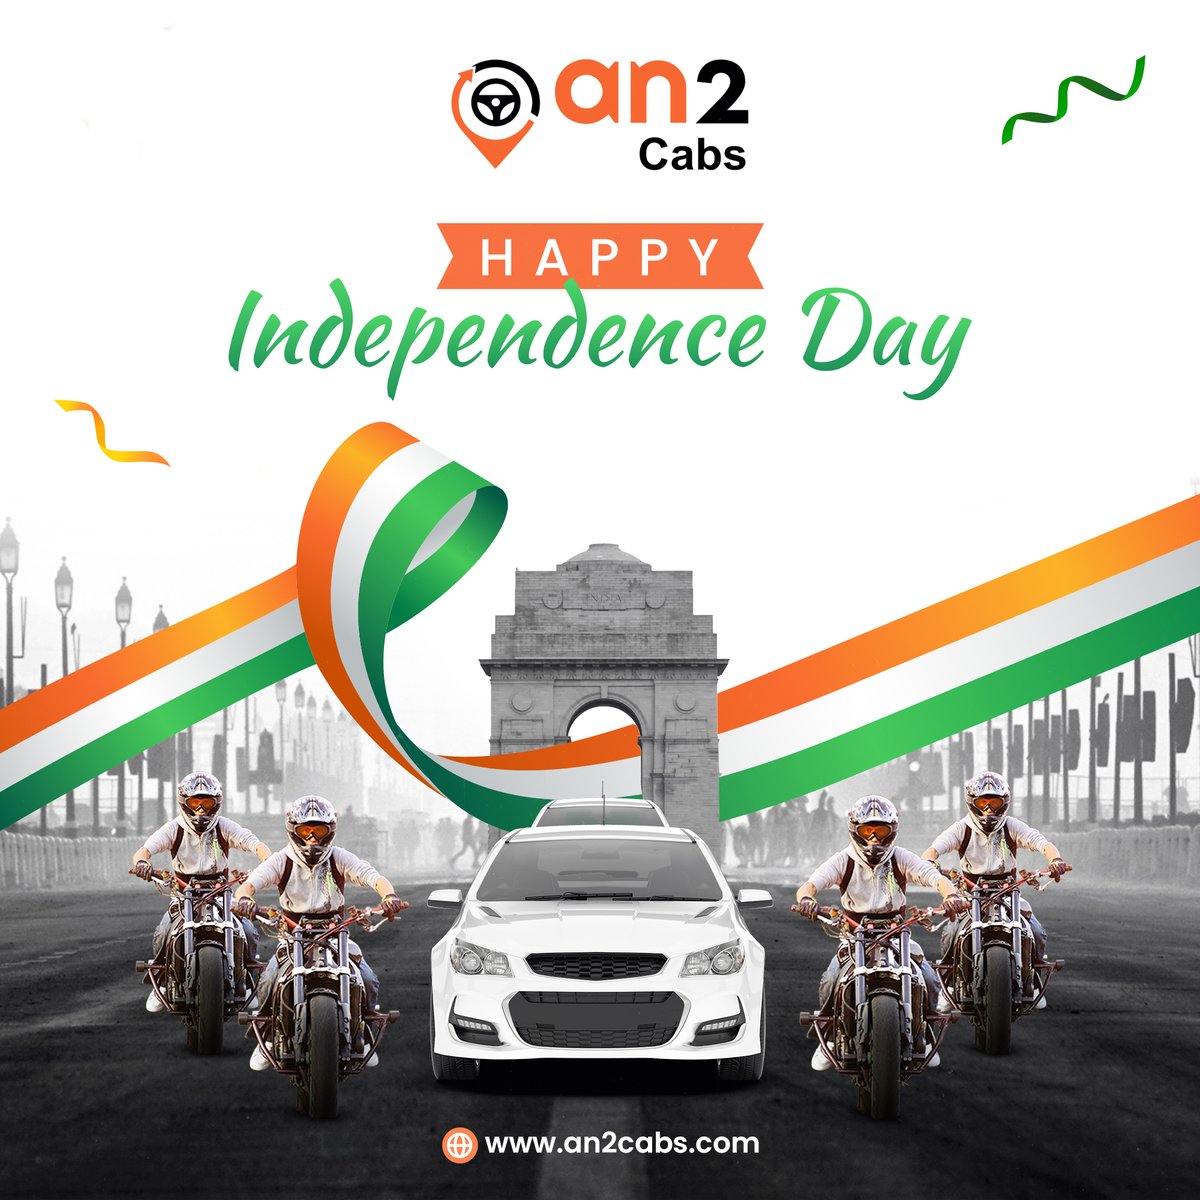 Happy Independence Day !!

#an2cabs #IndependenceDay #77thIndependenceDay  #happyindependenceday #freedom #india #JaiHind #JaiBharat #freedomfighters #Indian #indianarmy #iloveindia  #an2cabservices #cabs #cabsservice #trafficfree #comfortableride #rideinstyle #guwahati #assam